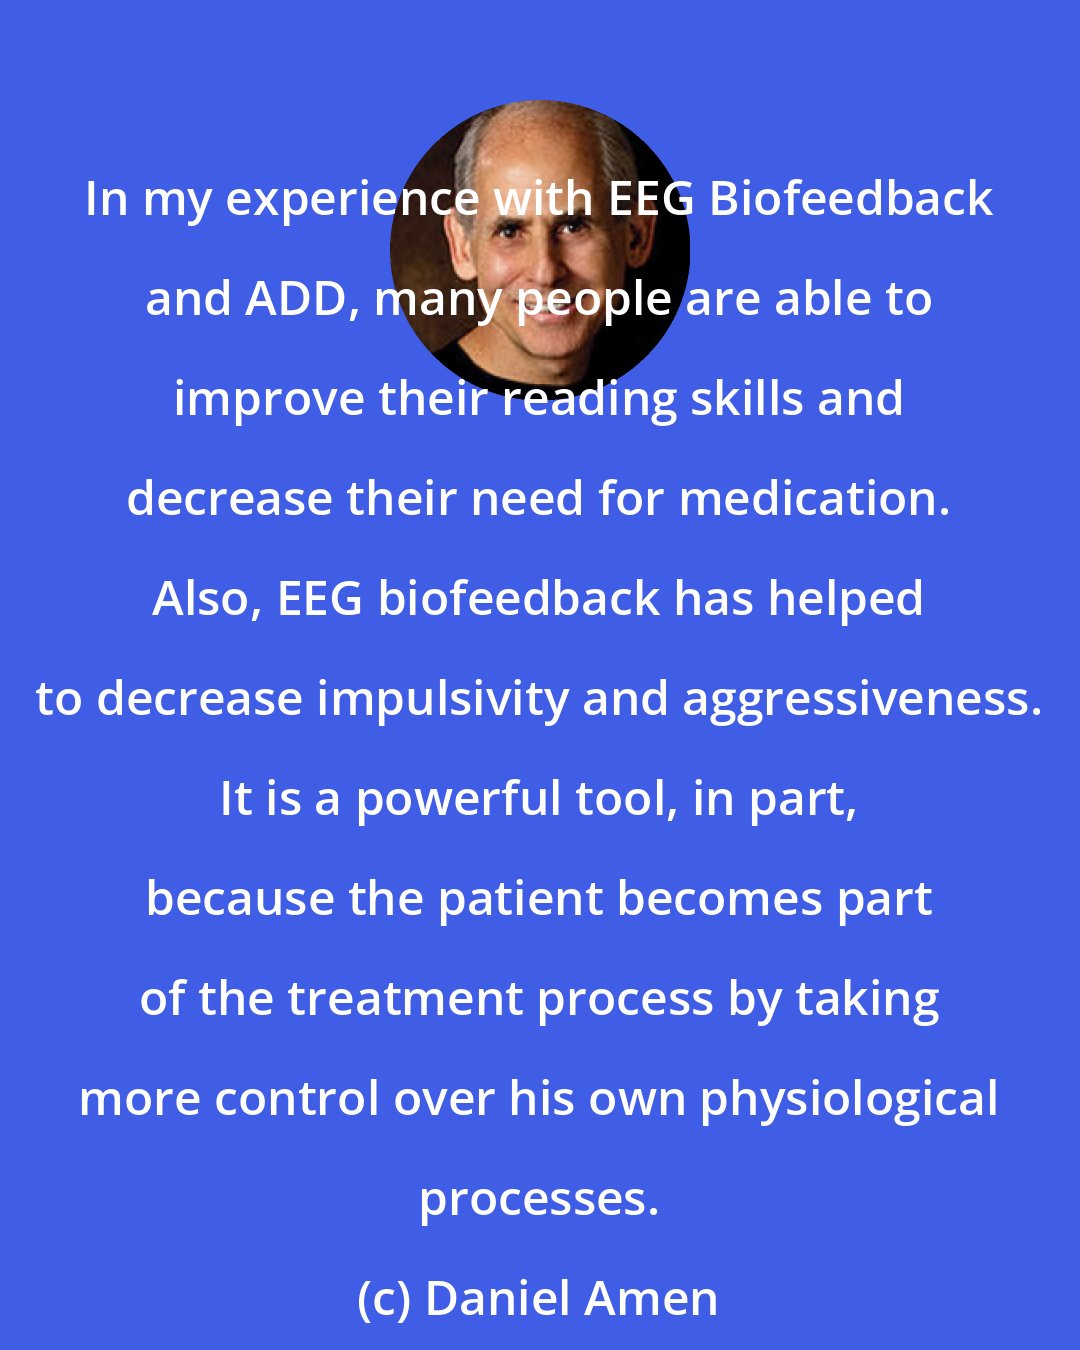 Daniel Amen: In my experience with EEG Biofeedback and ADD, many people are able to improve their reading skills and decrease their need for medication. Also, EEG biofeedback has helped to decrease impulsivity and aggressiveness. It is a powerful tool, in part, because the patient becomes part of the treatment process by taking more control over his own physiological processes.